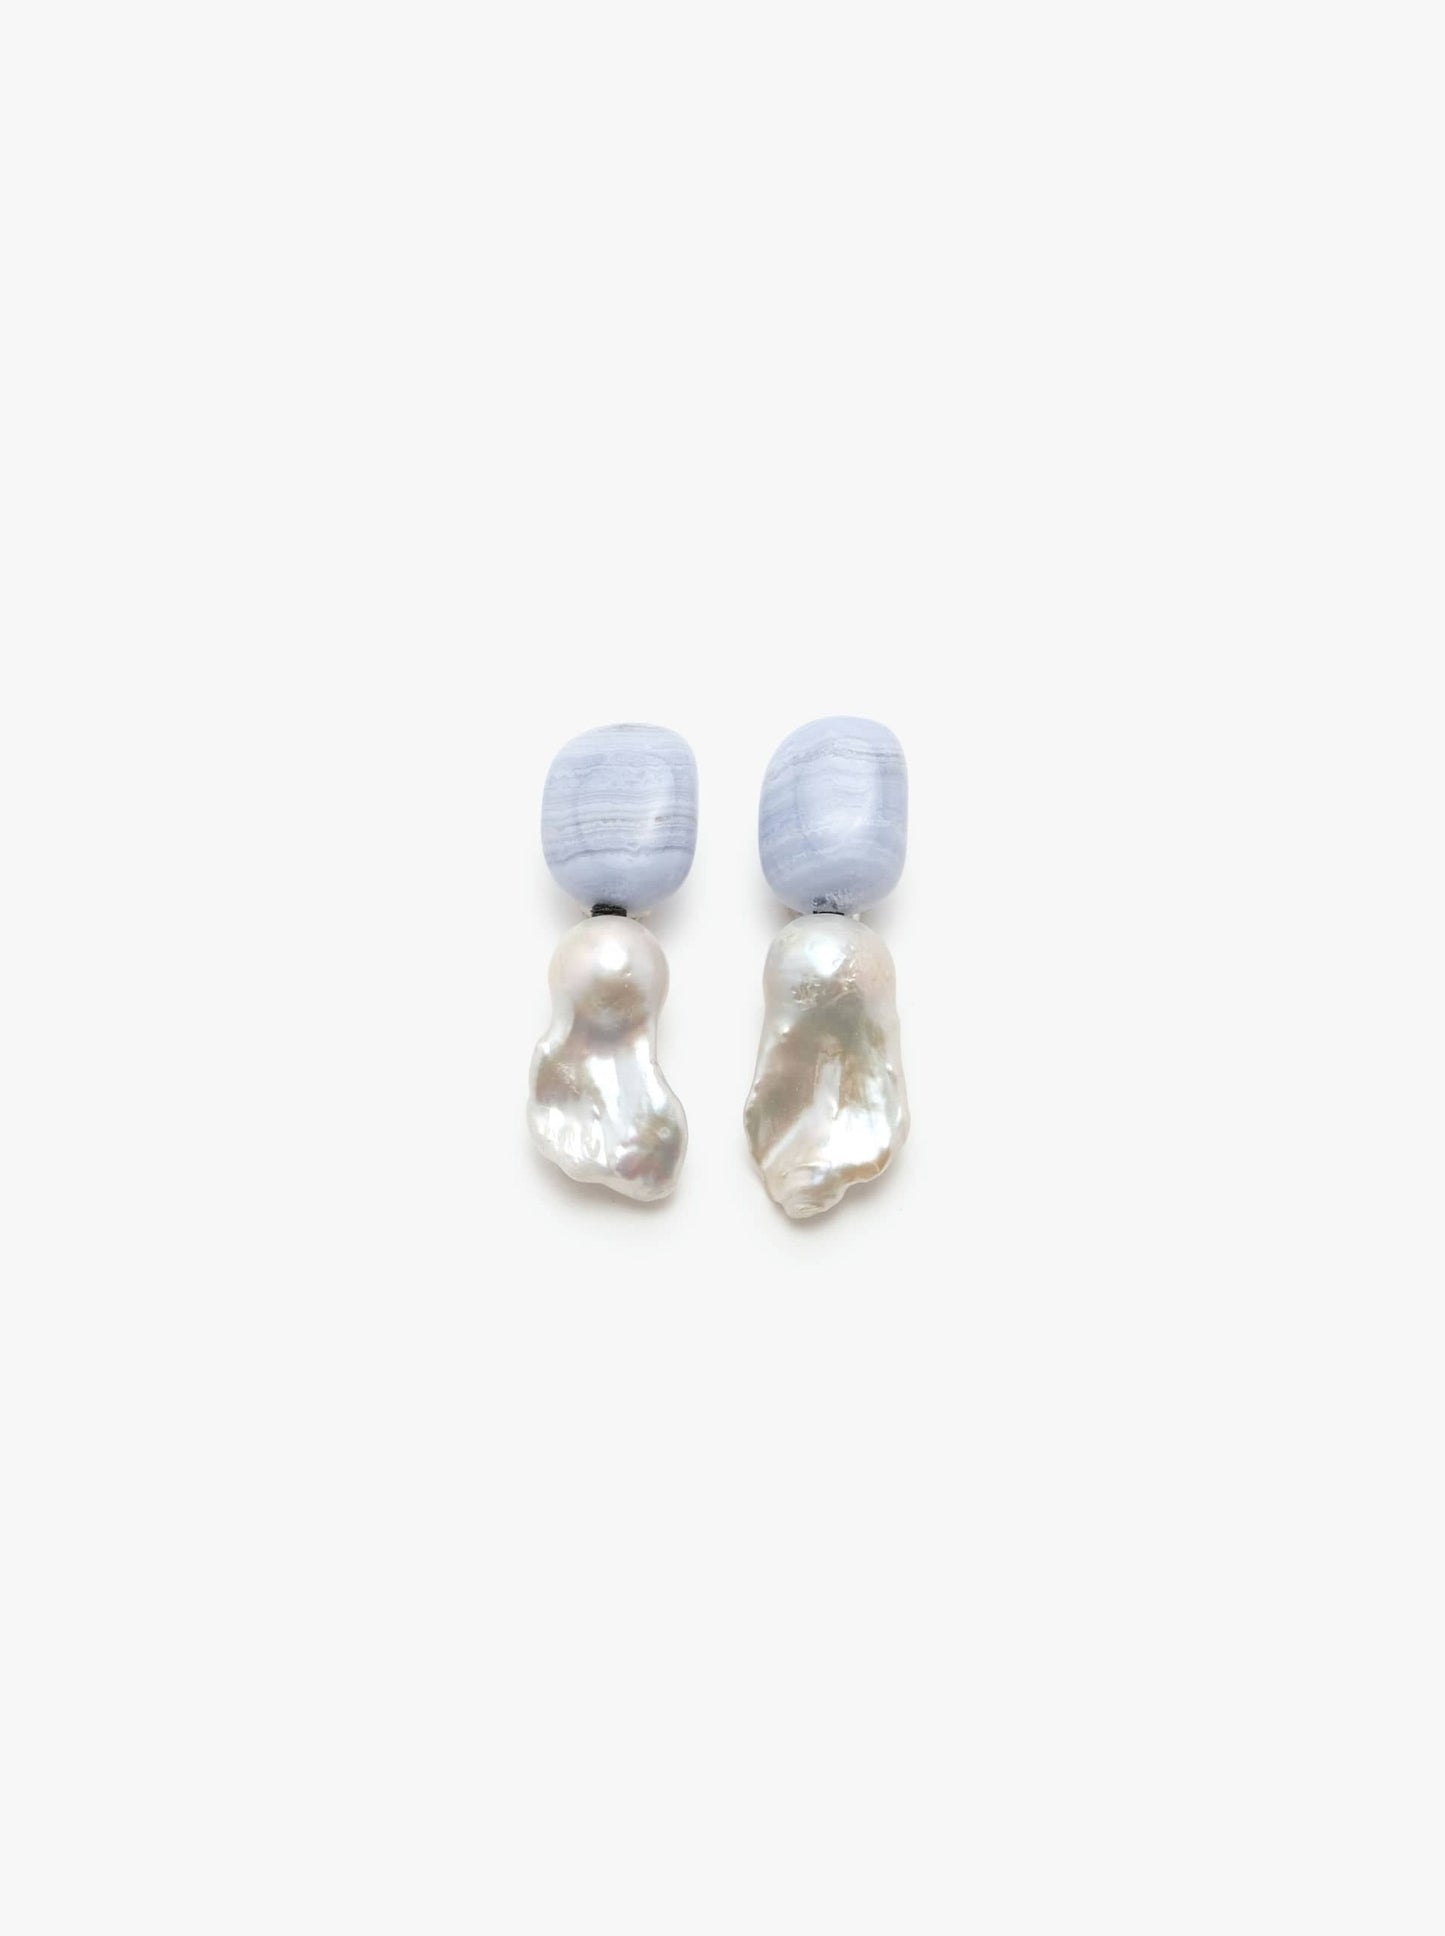 Earclips: baroque pearl, blue agate